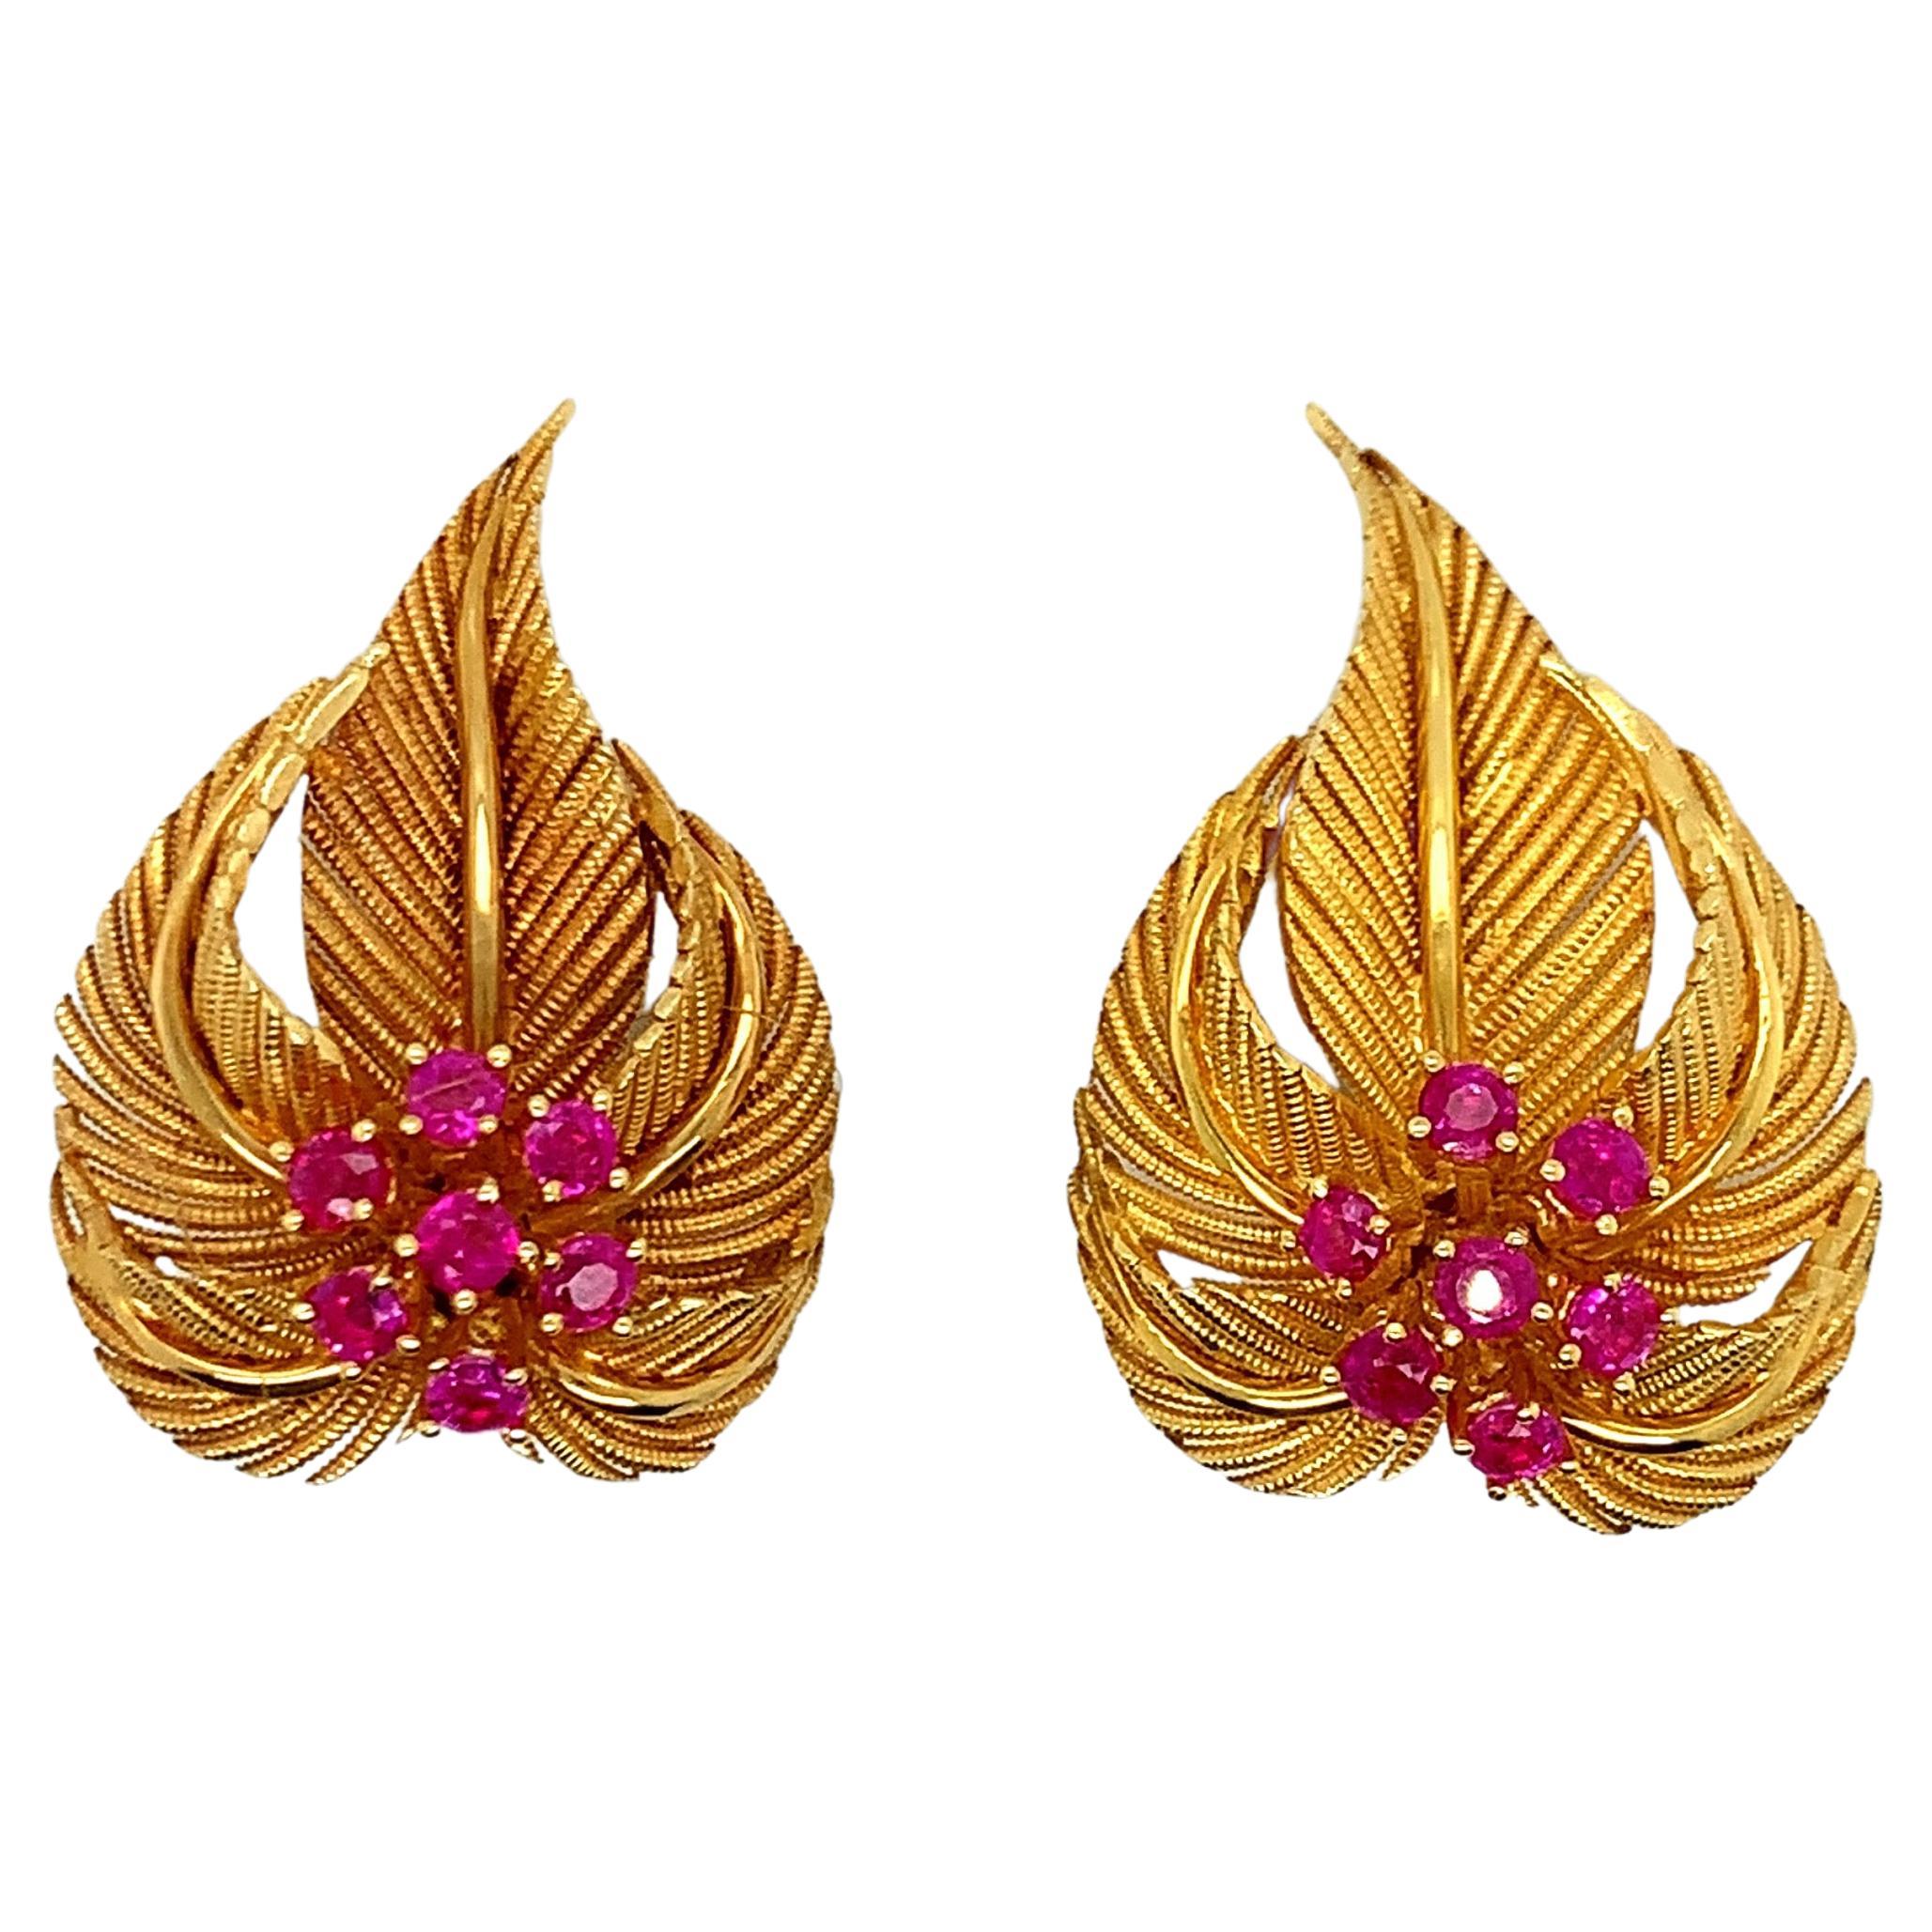 Tiffany & Co. Pink Sapphires Gold Ear Clips